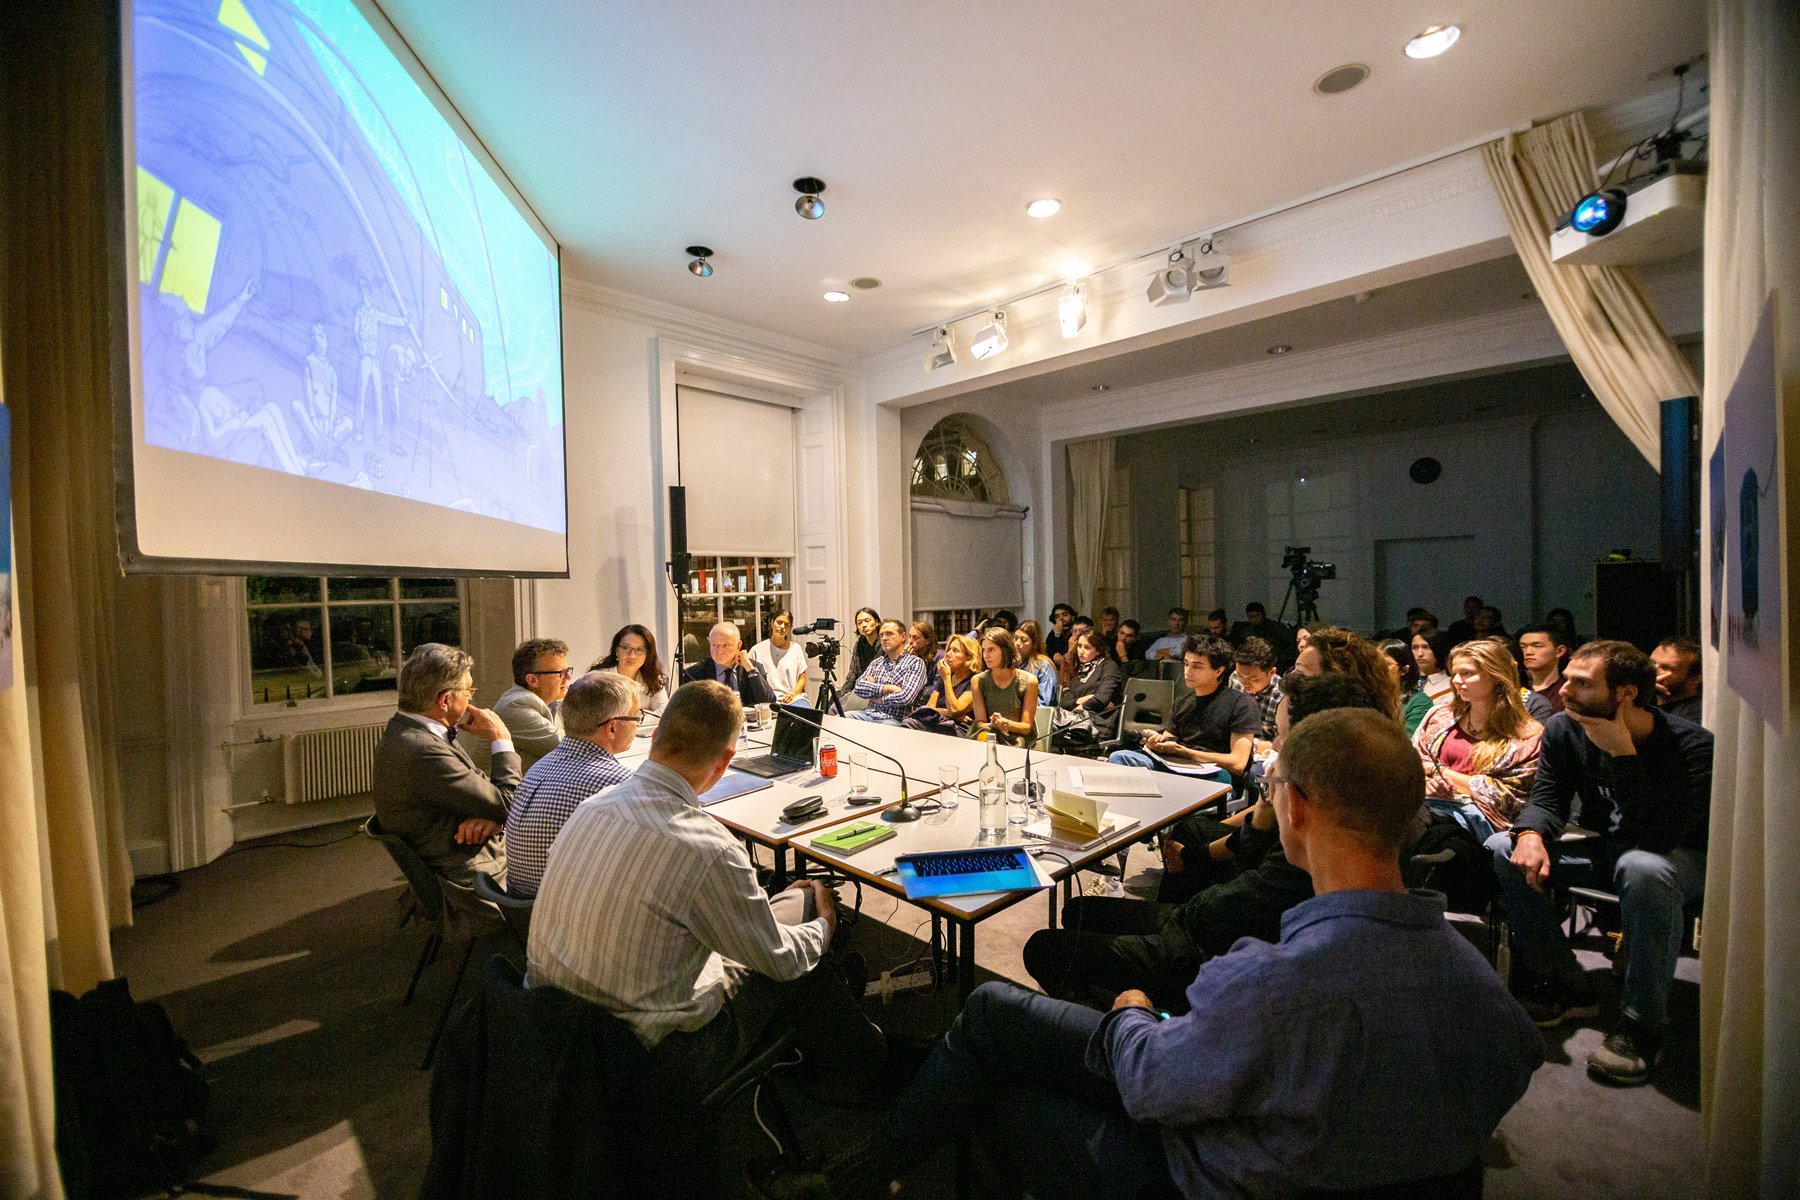 06_2019_UNLESS_SYMPOSIUM_ARCHITECTURE-IN-THE-EXREME_ROUND-TABLE.jpg